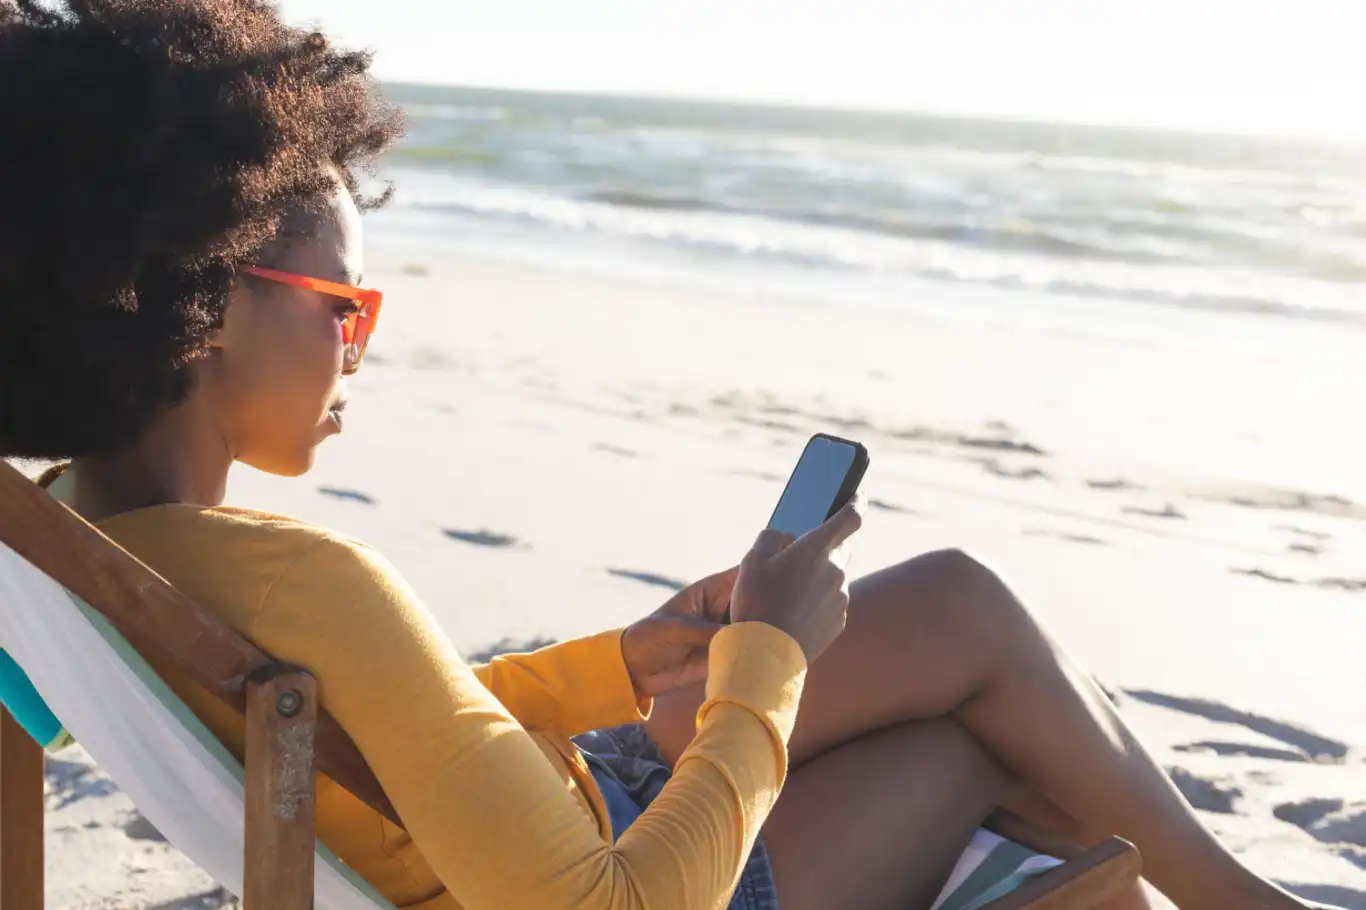 Woman in sunglasses sitting in deckchair using smartphone on sunny beach. Summer, relaxation, communication, free time and vacation, unaltered.